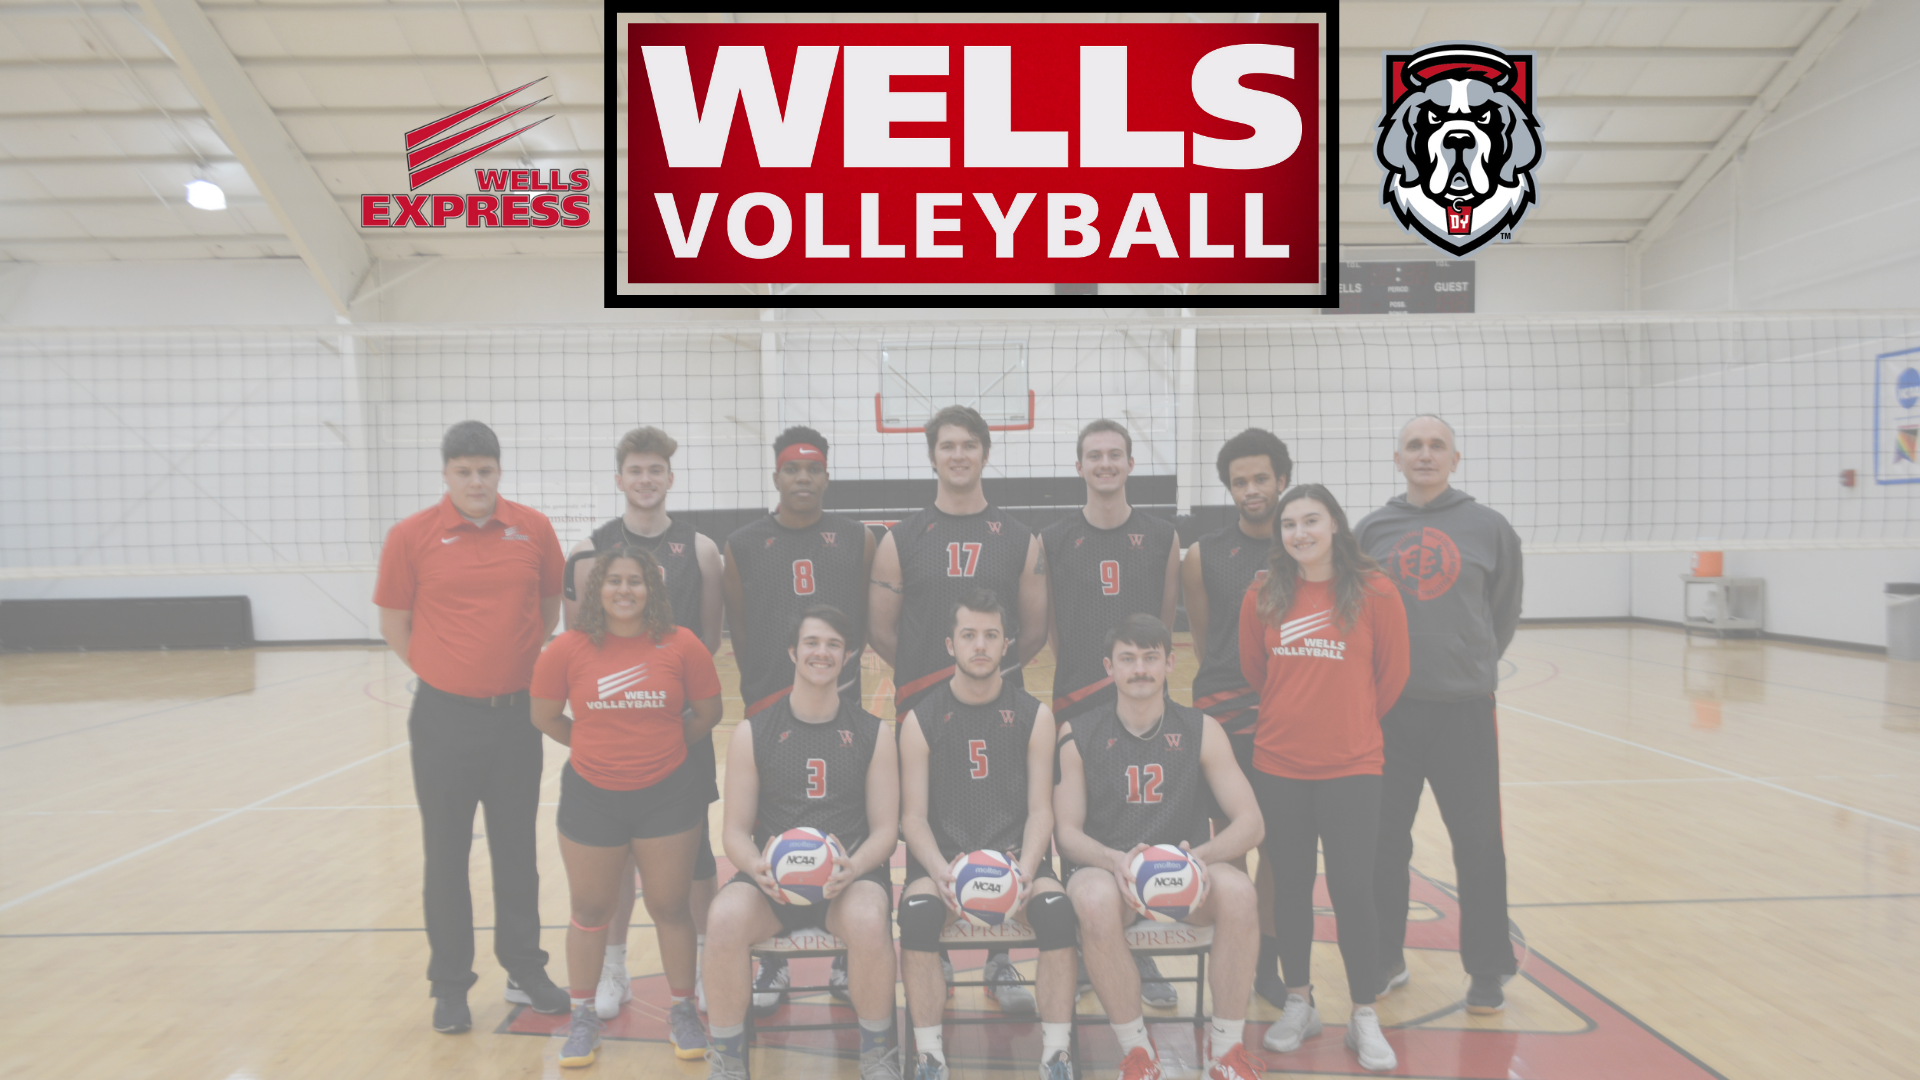 Men's Volleyball takes on D'Youville